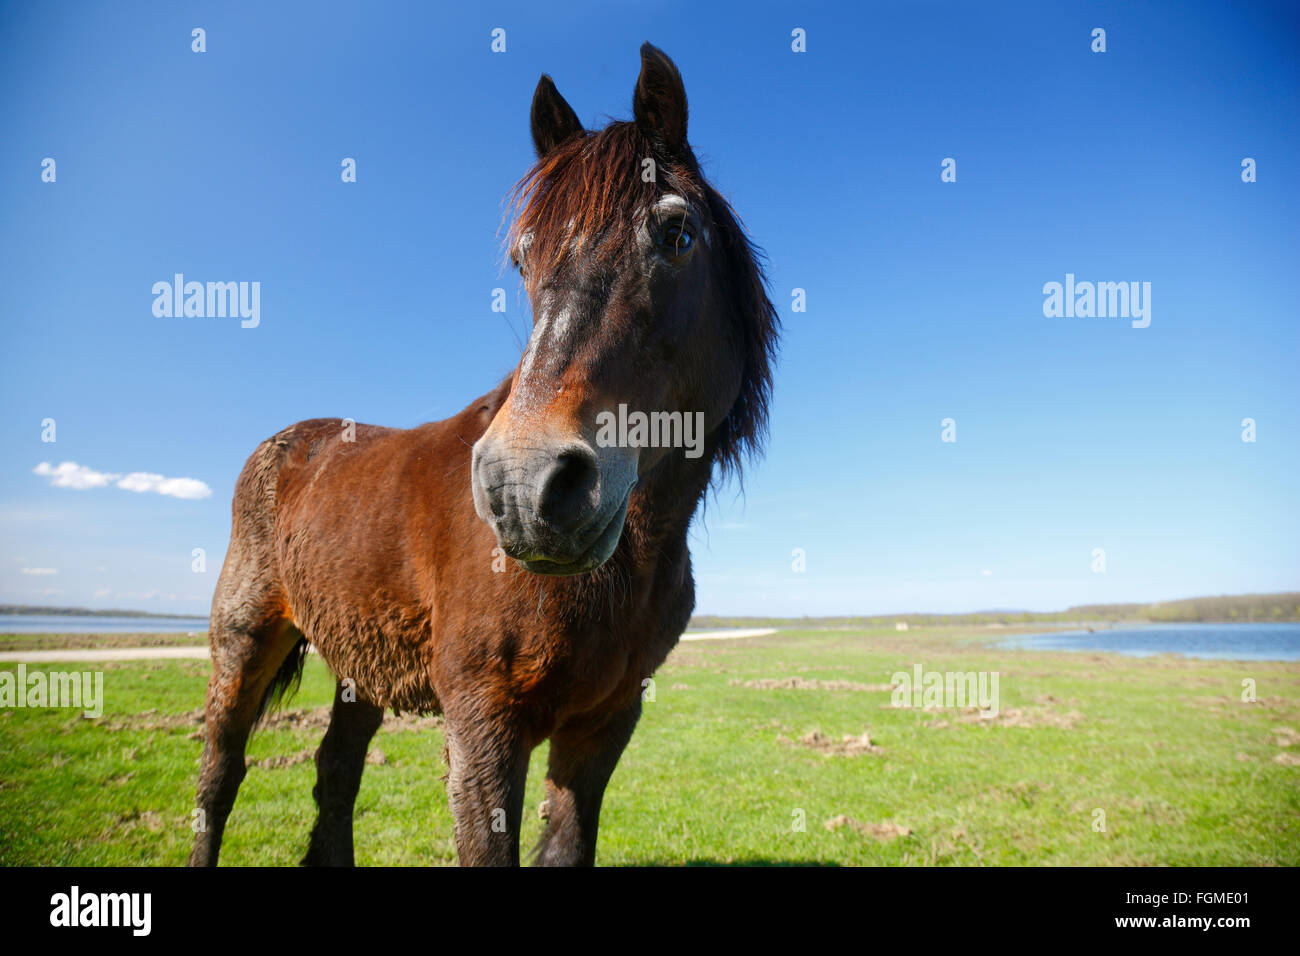 Horse on a meadow Stock Photo